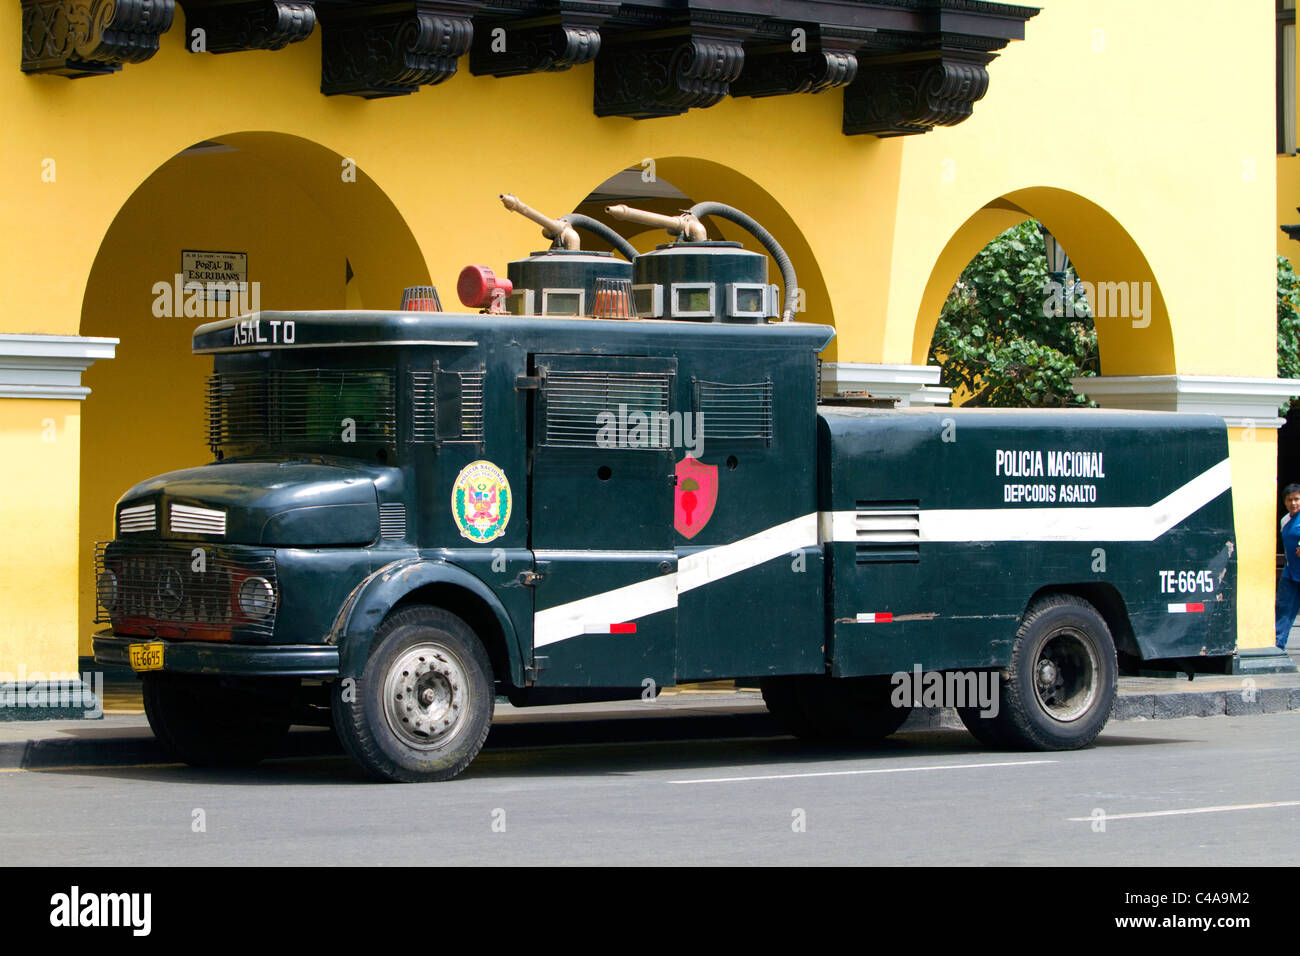 National police water cannon vehicle used for crowd control, parked at the Plaza Mayor or Plaza de Armas of Lima, Peru. Stock Photo